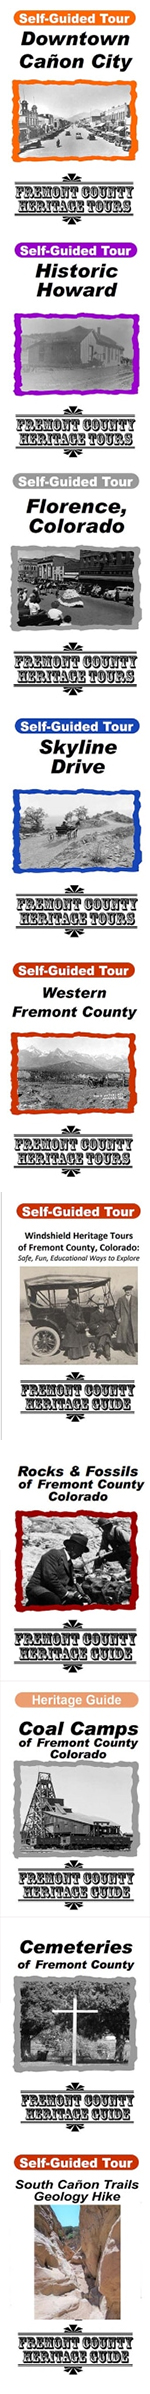 Fremont County Heritage Tours Guides